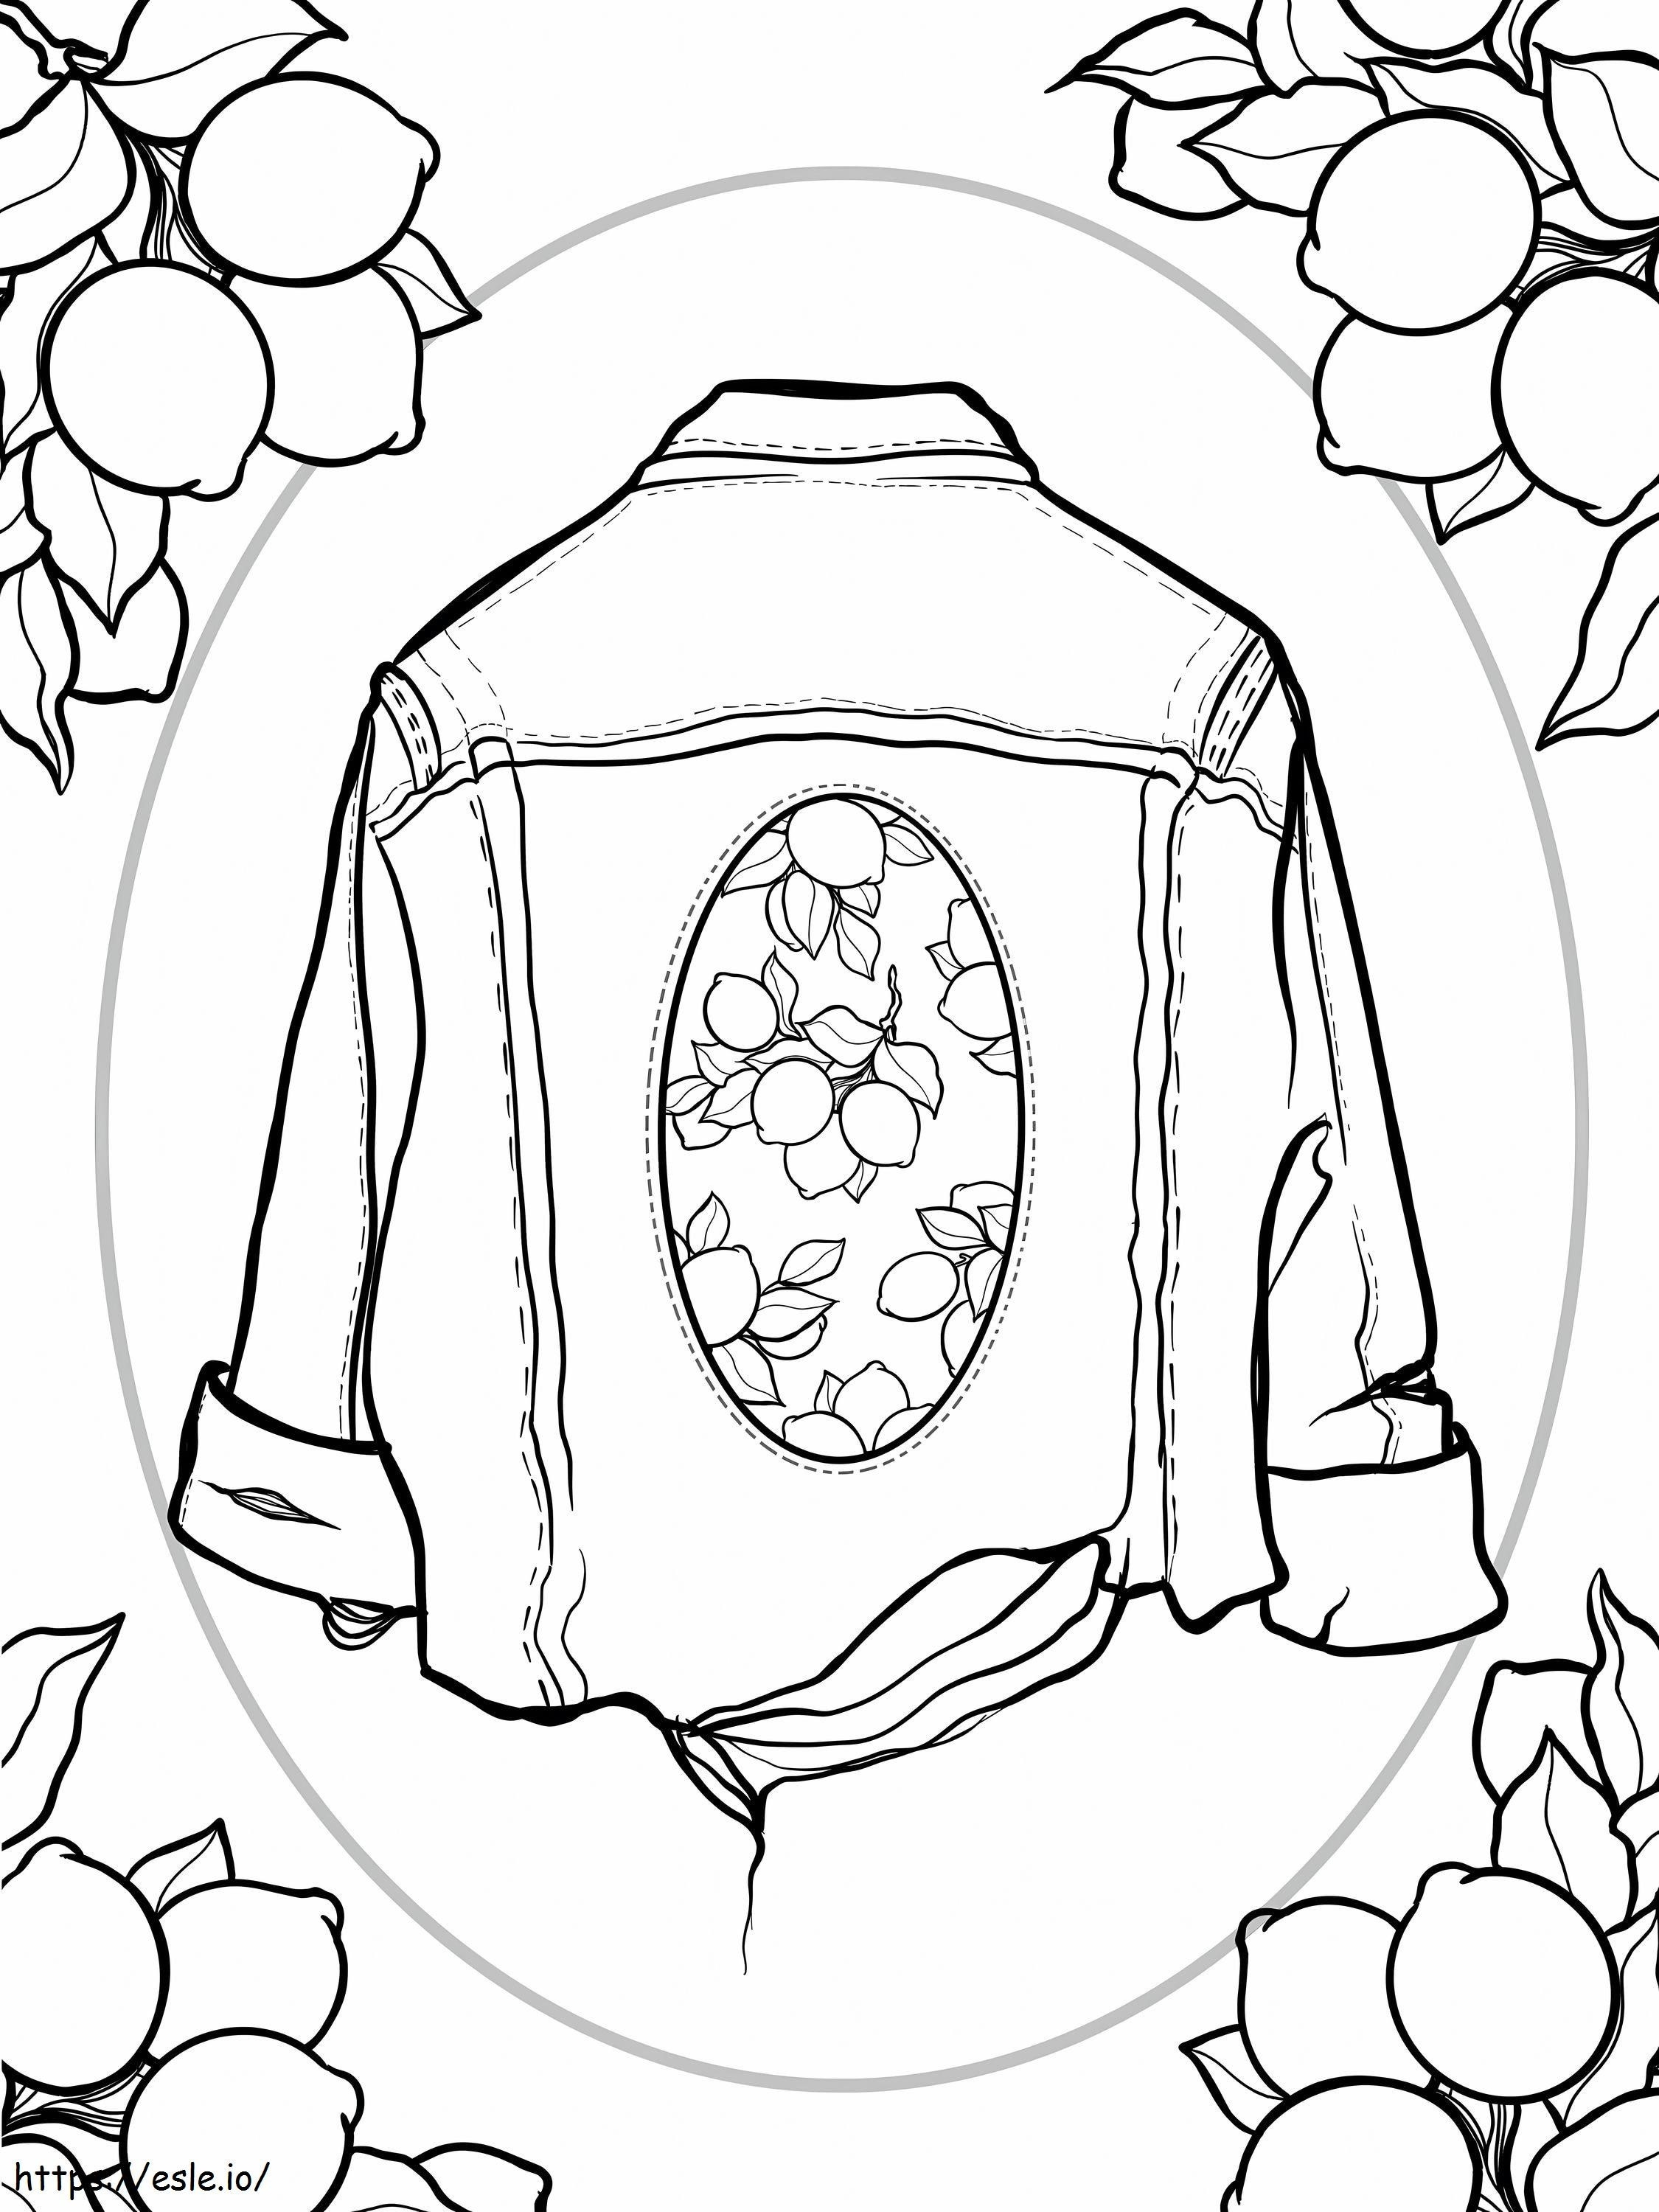 Jacket With Lemon Scaled coloring page